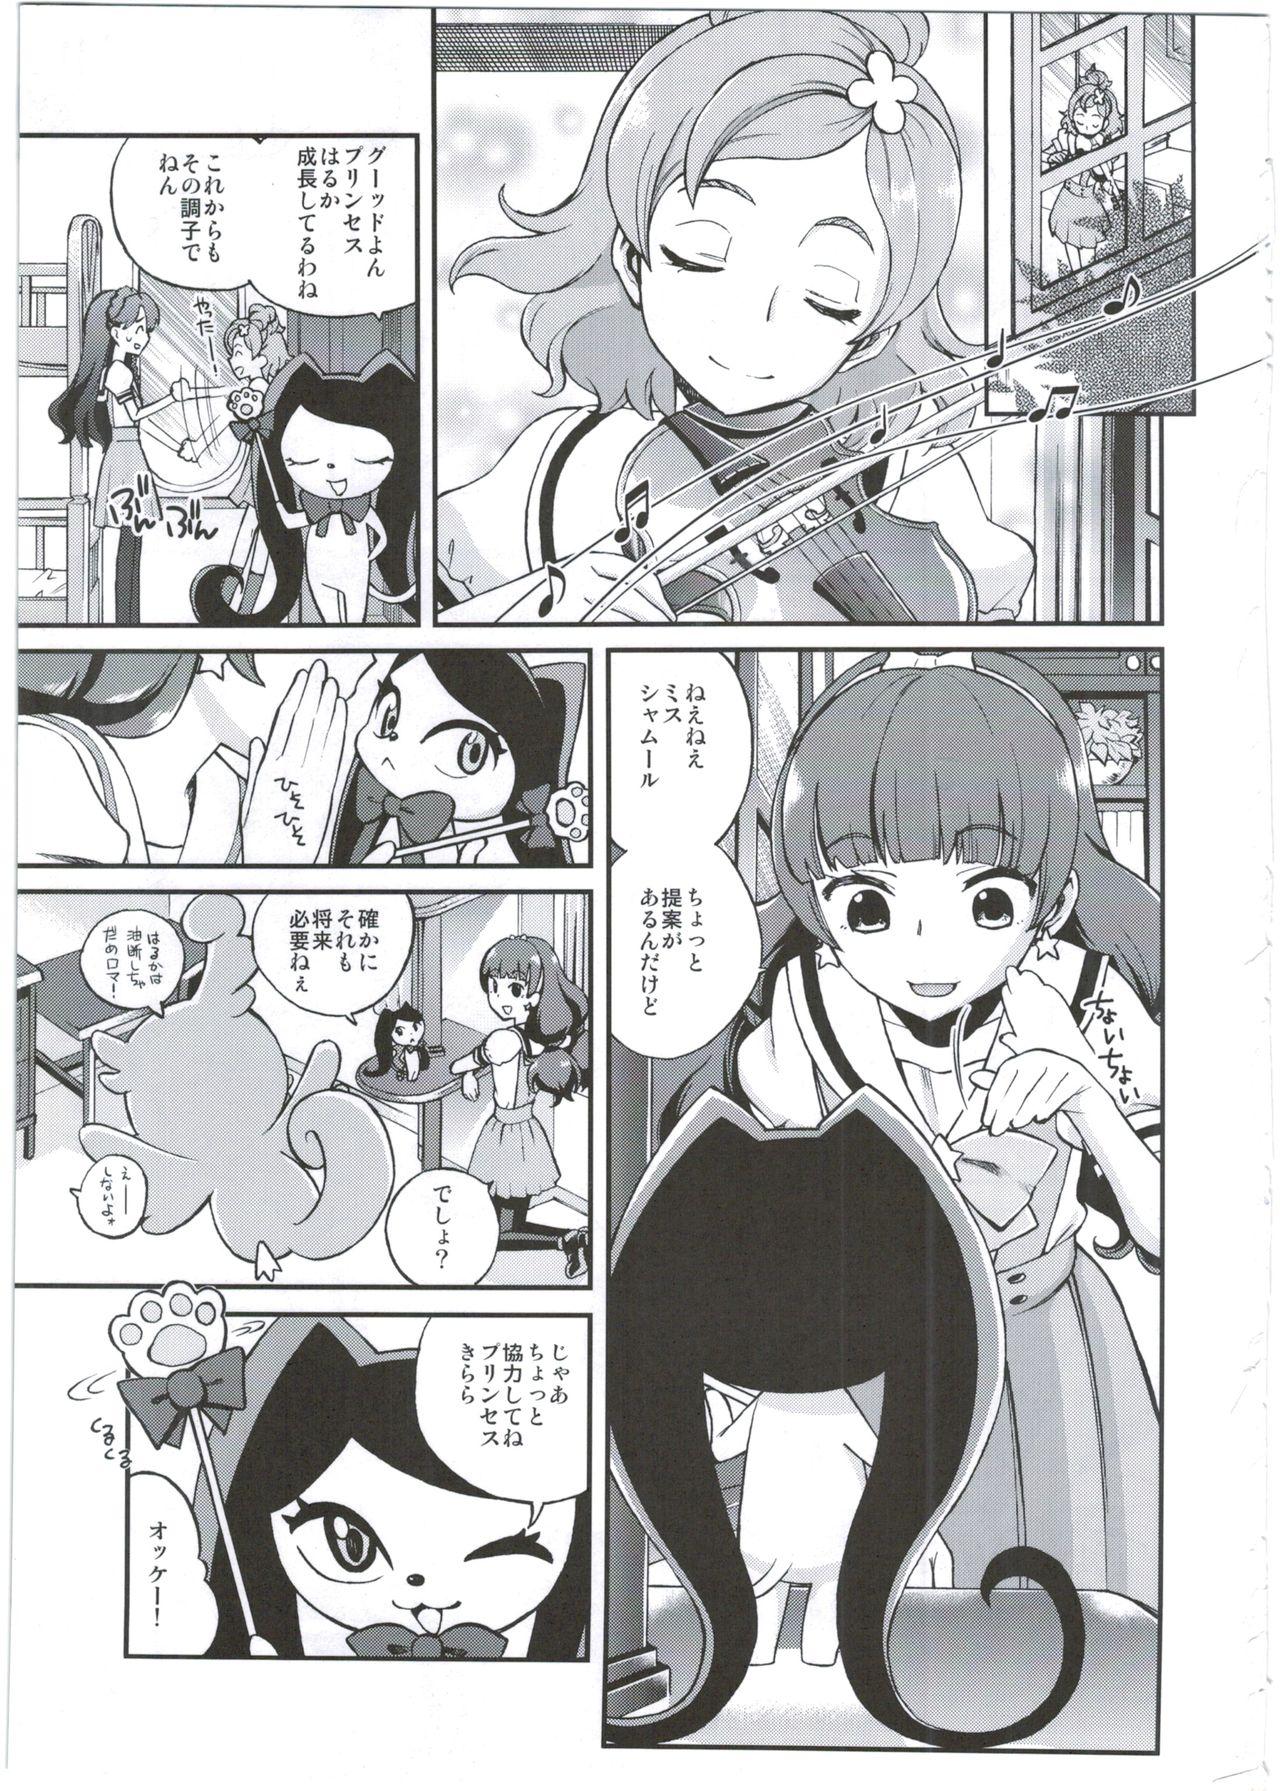 Squirters Twinkle Star Princess - Go princess precure Matures - Page 3